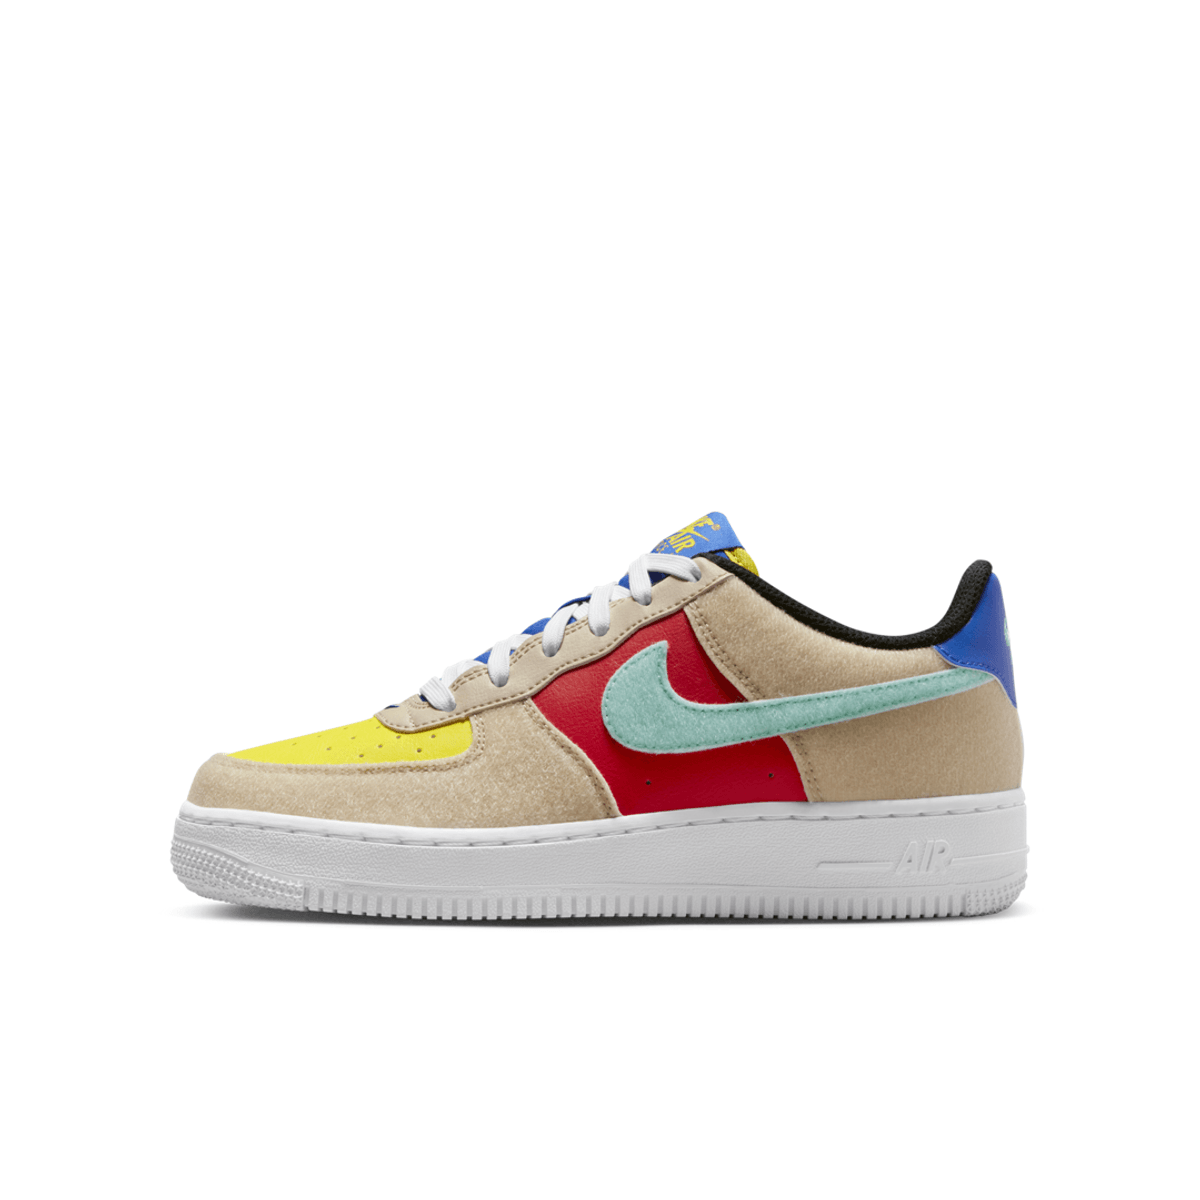 Nike Air Force 1 Low Multi-Color Velcro (GS)